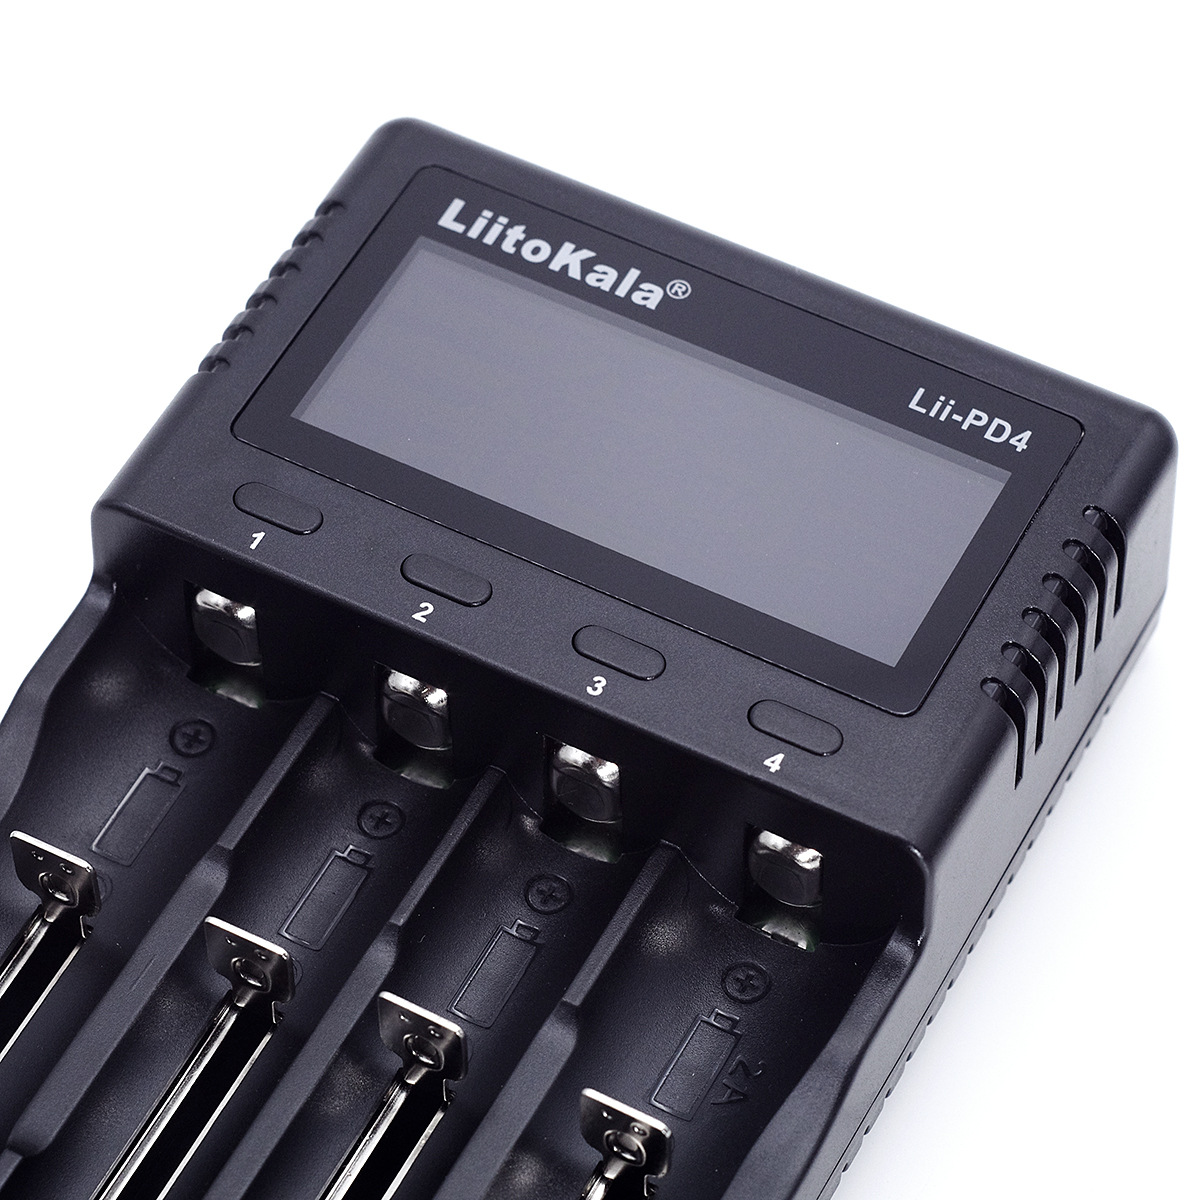 Liitokala Lii-PD4 LCD 3.7V 18650 21700 26650 4 Slots Intelligent Battery Charger for Cylindrical Rechargeable Battery LCD Display Smart Flashlight Cells Charger